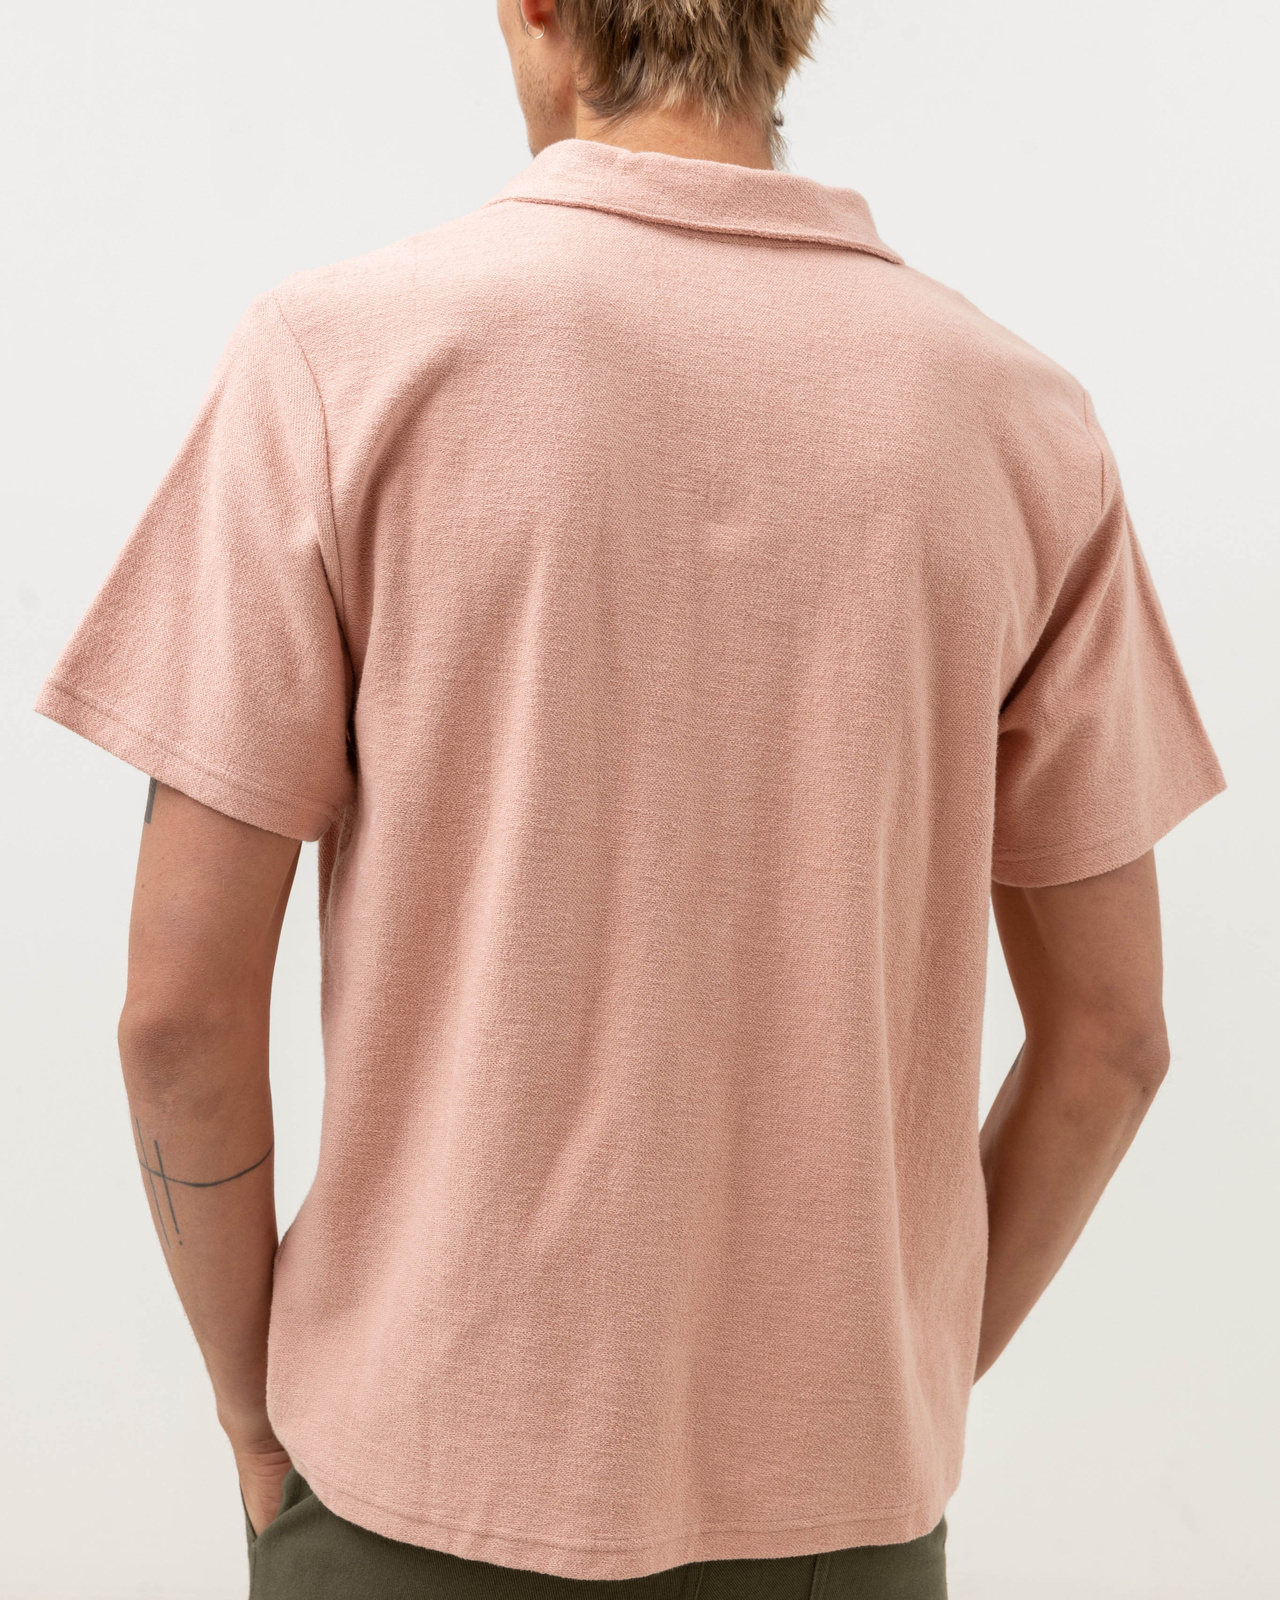 Vintage Terry Polo - Guava - L